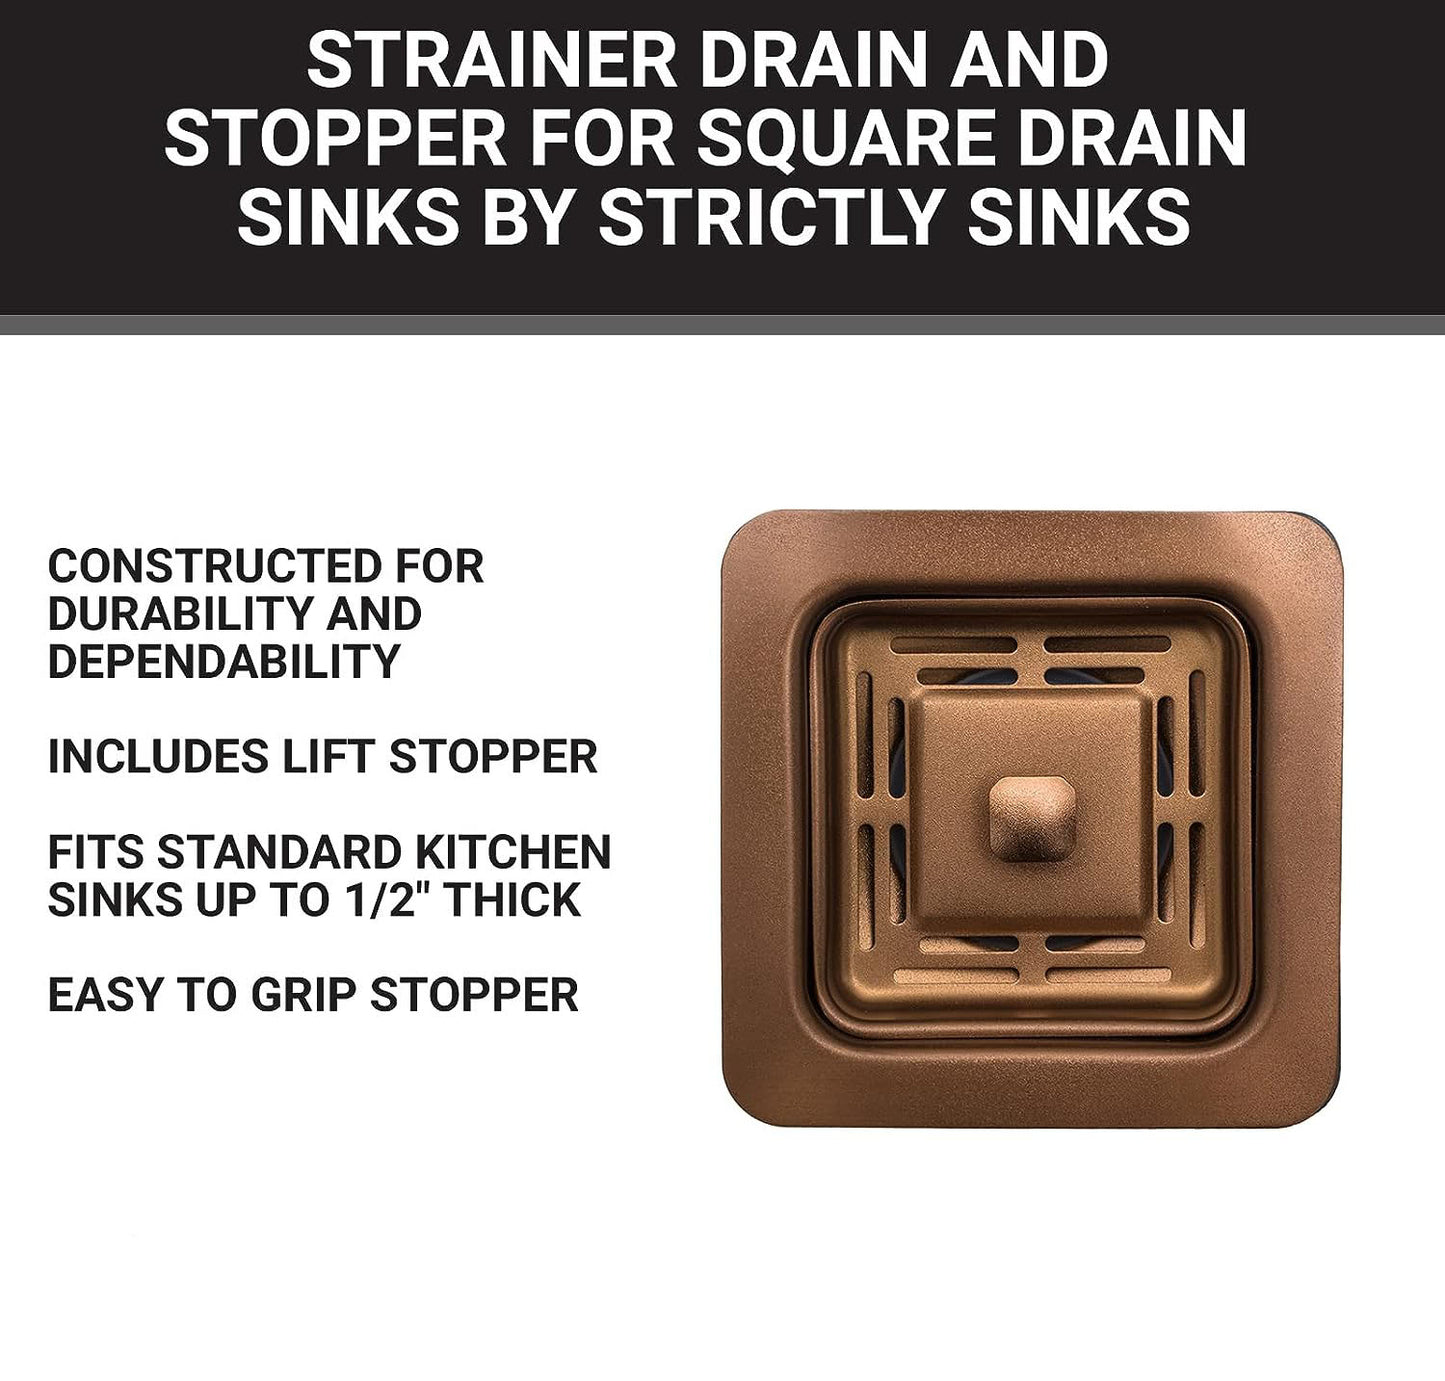 Sinks Stainless Steel Sink Strainer for Kitchen Sink - Stain Resistant Kitchen Sink Strainer with Large Collection Basket Sink Drain Strainer for All Square Drain Sinks (Rose Gold) Fossa Home